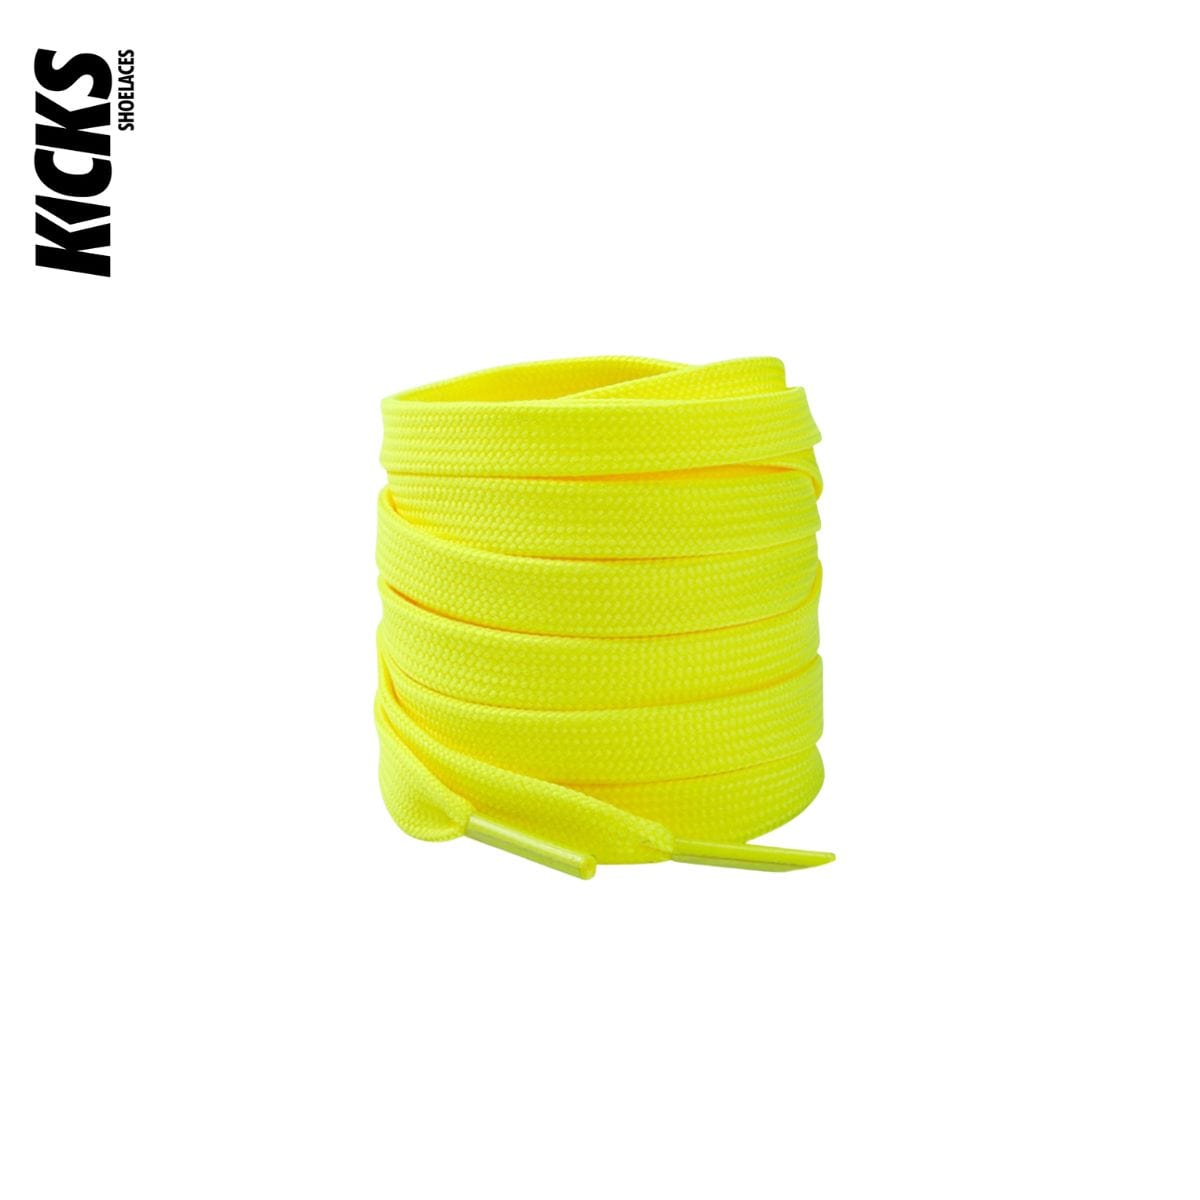 Yellow Replacement Shoe Laces for Adidas NMD Sneakers by Kicks Shoelaces